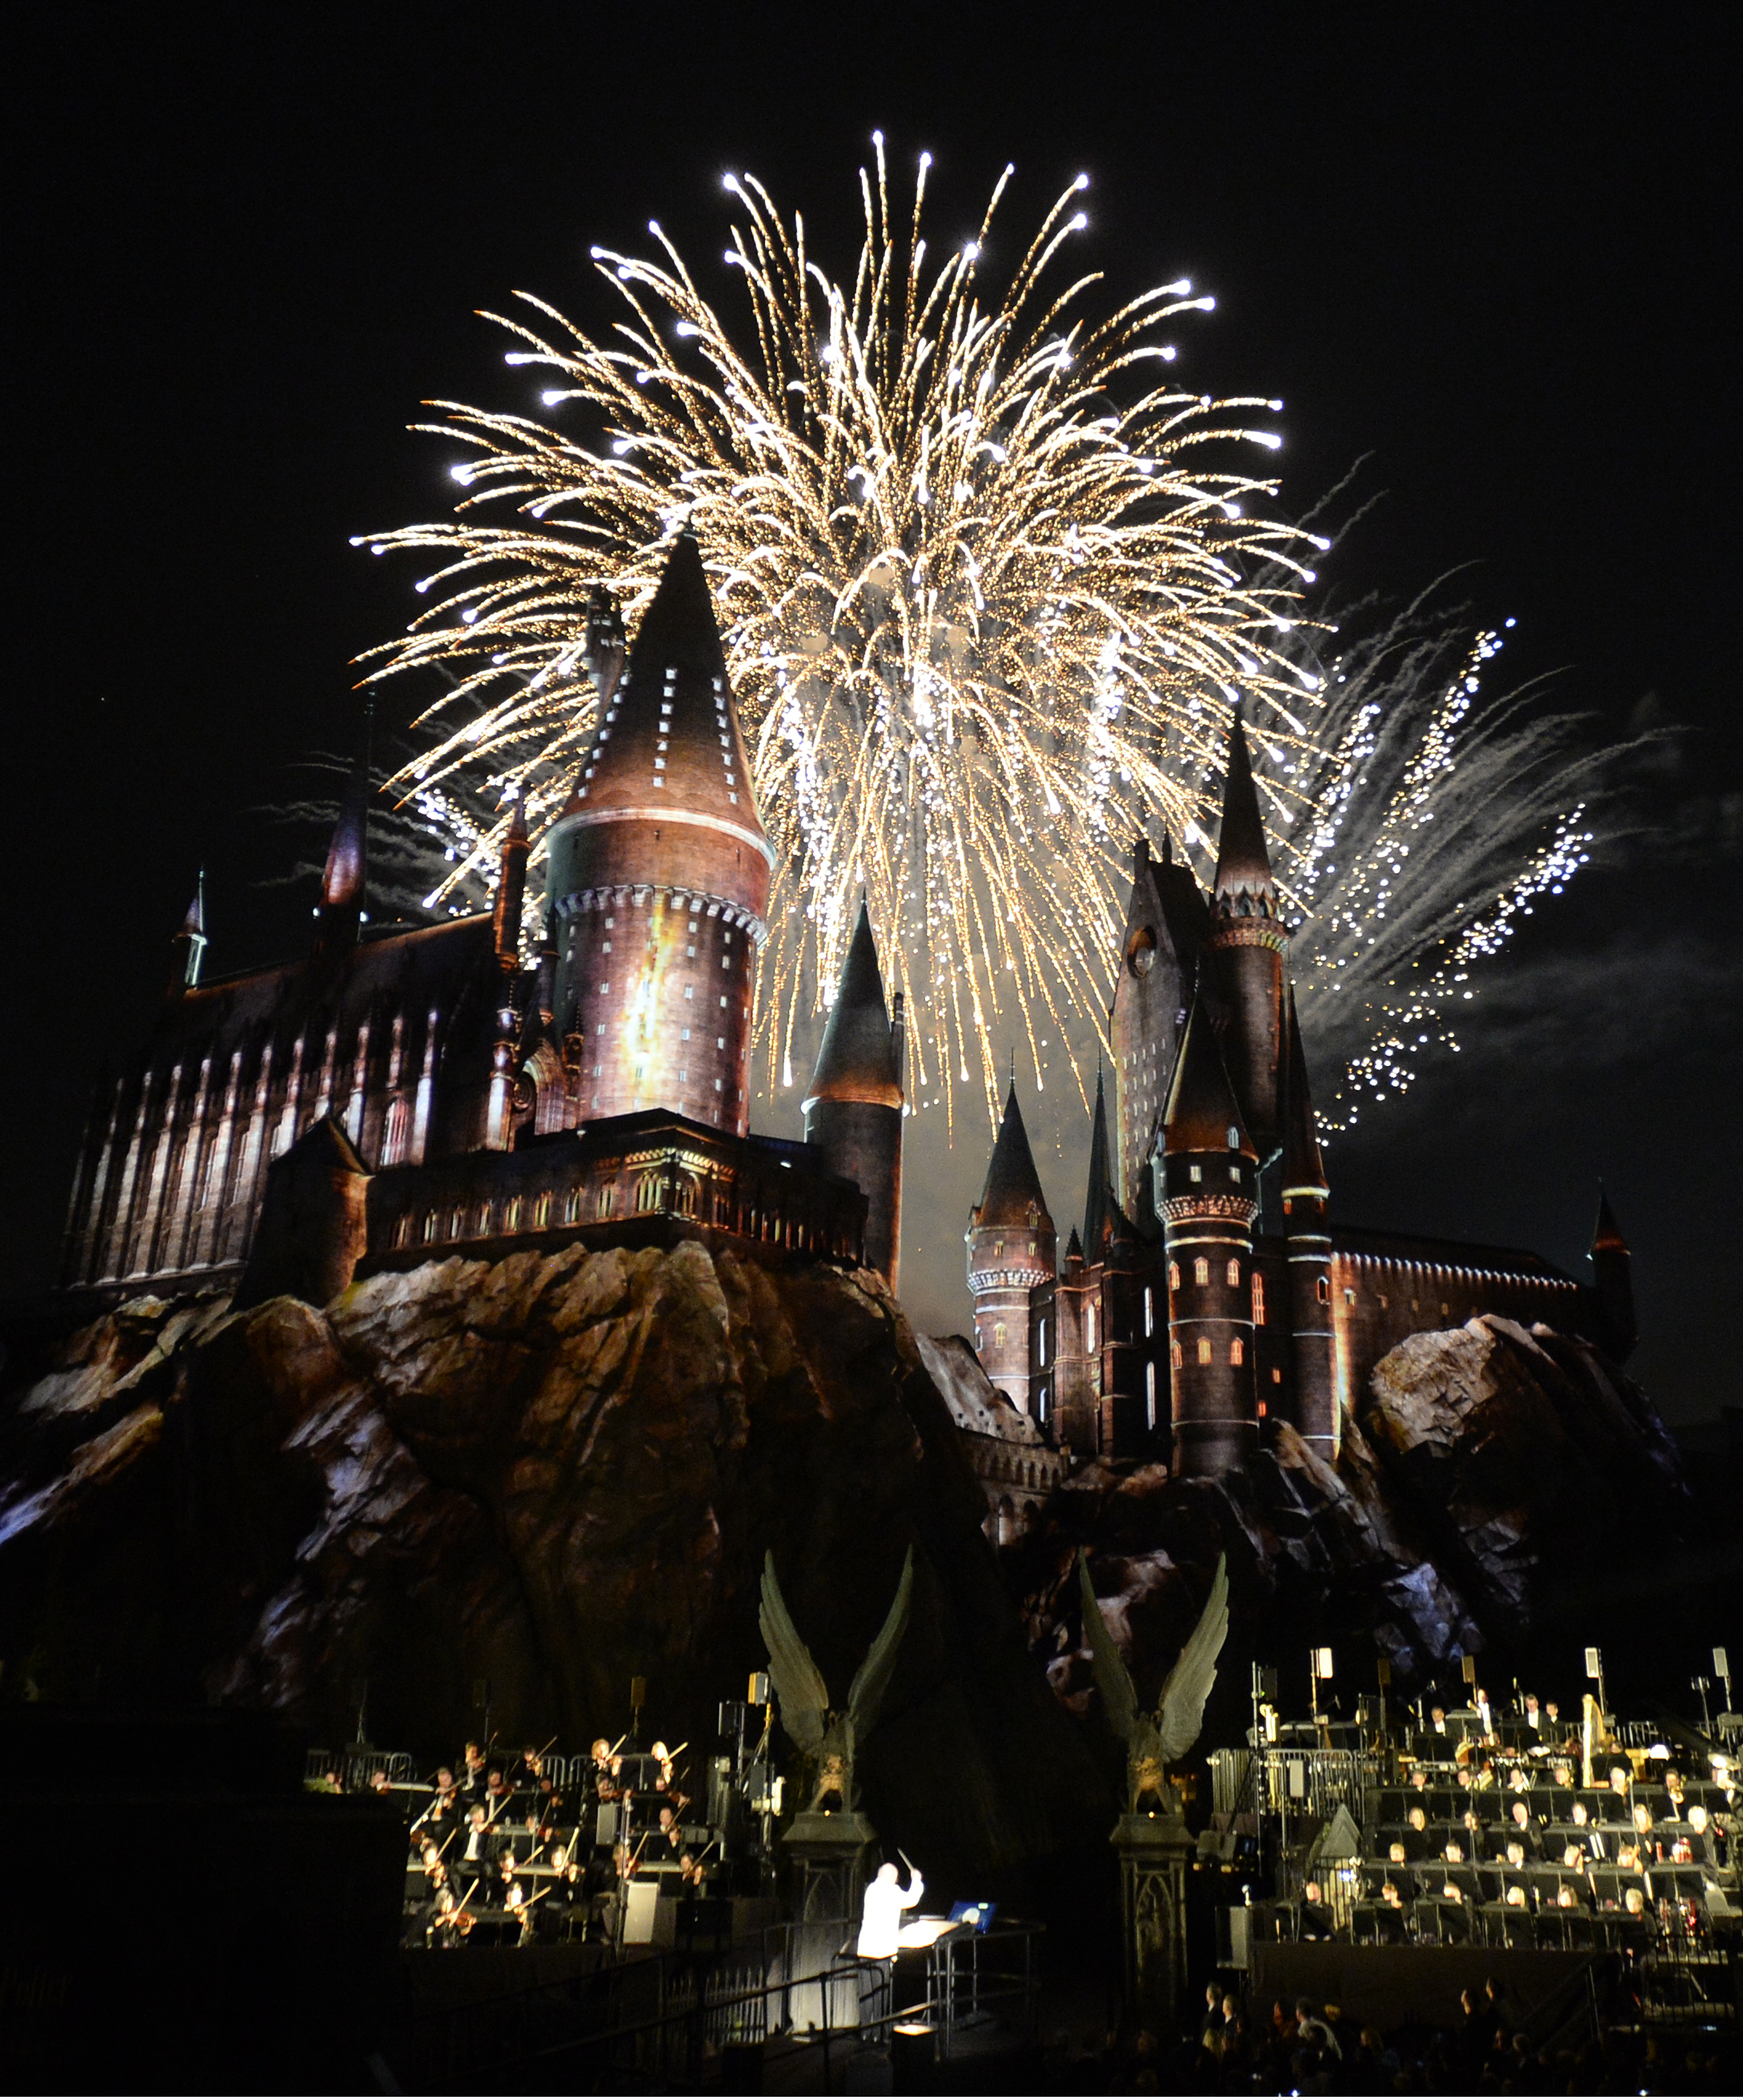 HOGWARTS AT NIGHT. Fireworks explode above the castle at the The Wizarding World of Harry Potter as the LA Philharmonic orchestra led by John Williams plays at the VIP Press preview at Universal Studios in Hollywood, California, USA, late 05 April 2016. The new complex and ride include a replica of Hogwarts Castle, the village, the signature ride 'Harry Potter and the Forbidden Journey' and will open to the public on April 7, 2016. Photo by Mike Nelson/EPA 